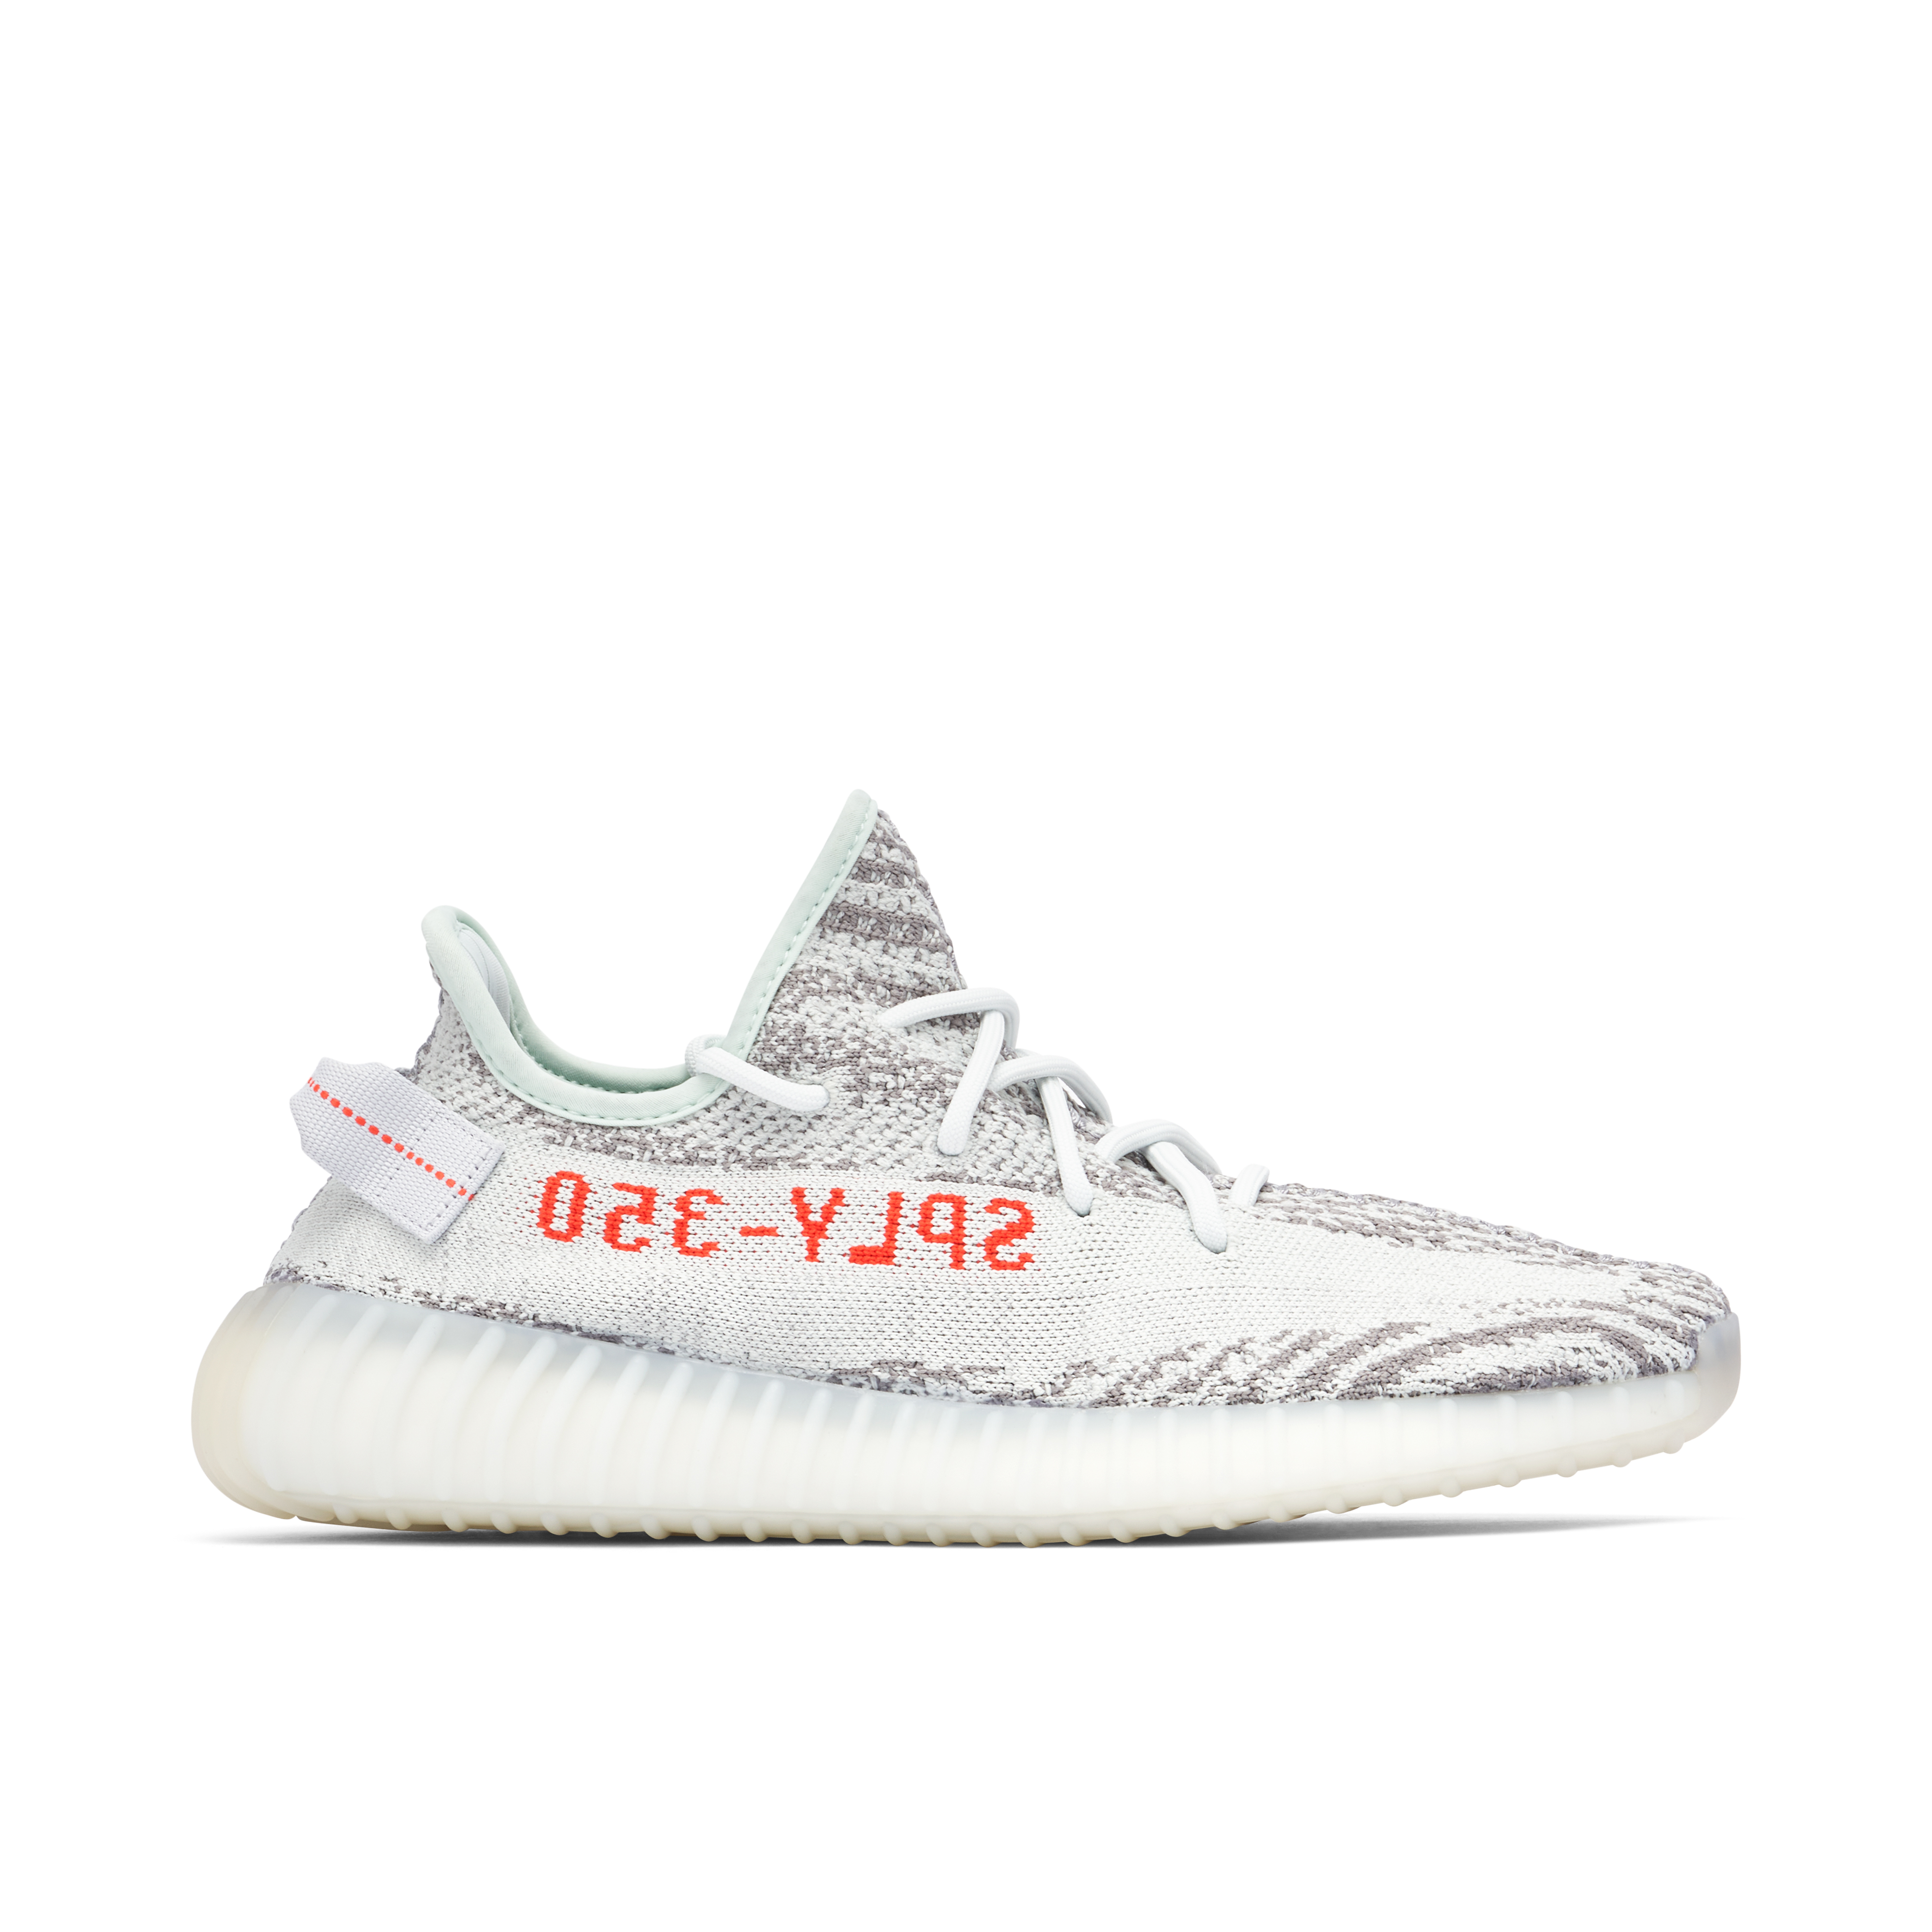 Yeezy Boost 350 V2 Blue Tint | B37571 | Laced